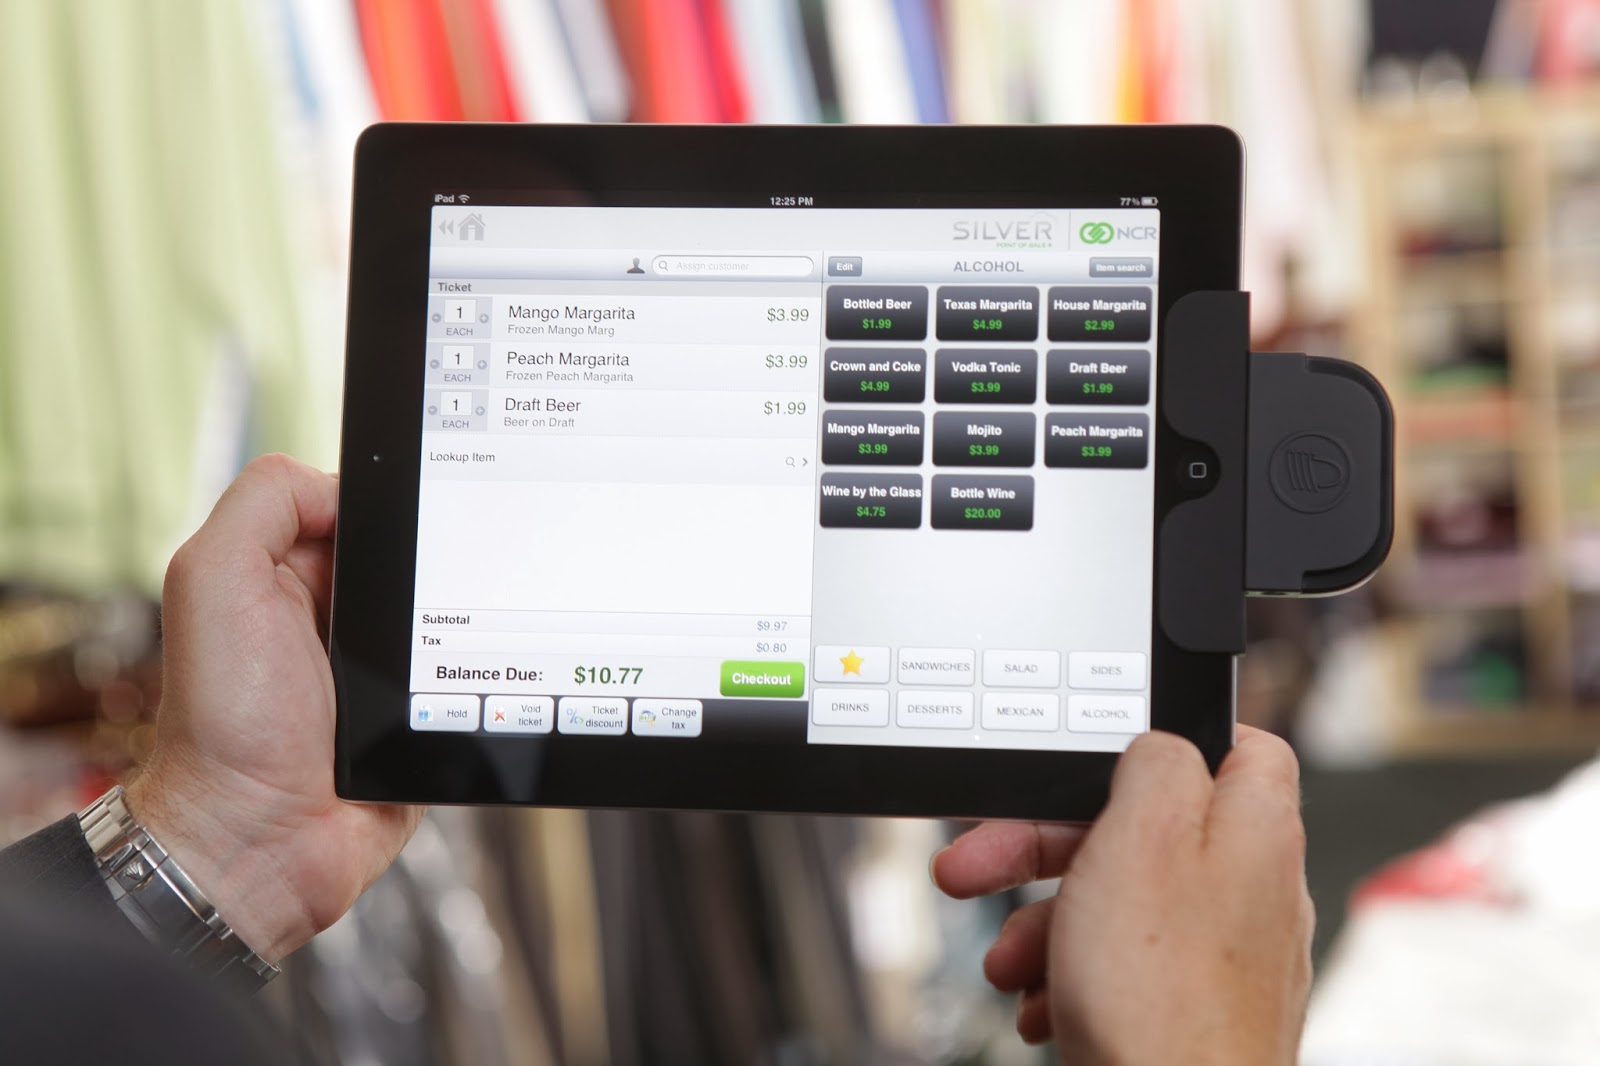 Seattle Tacoma Point of Sale: iPad POS system from NCR